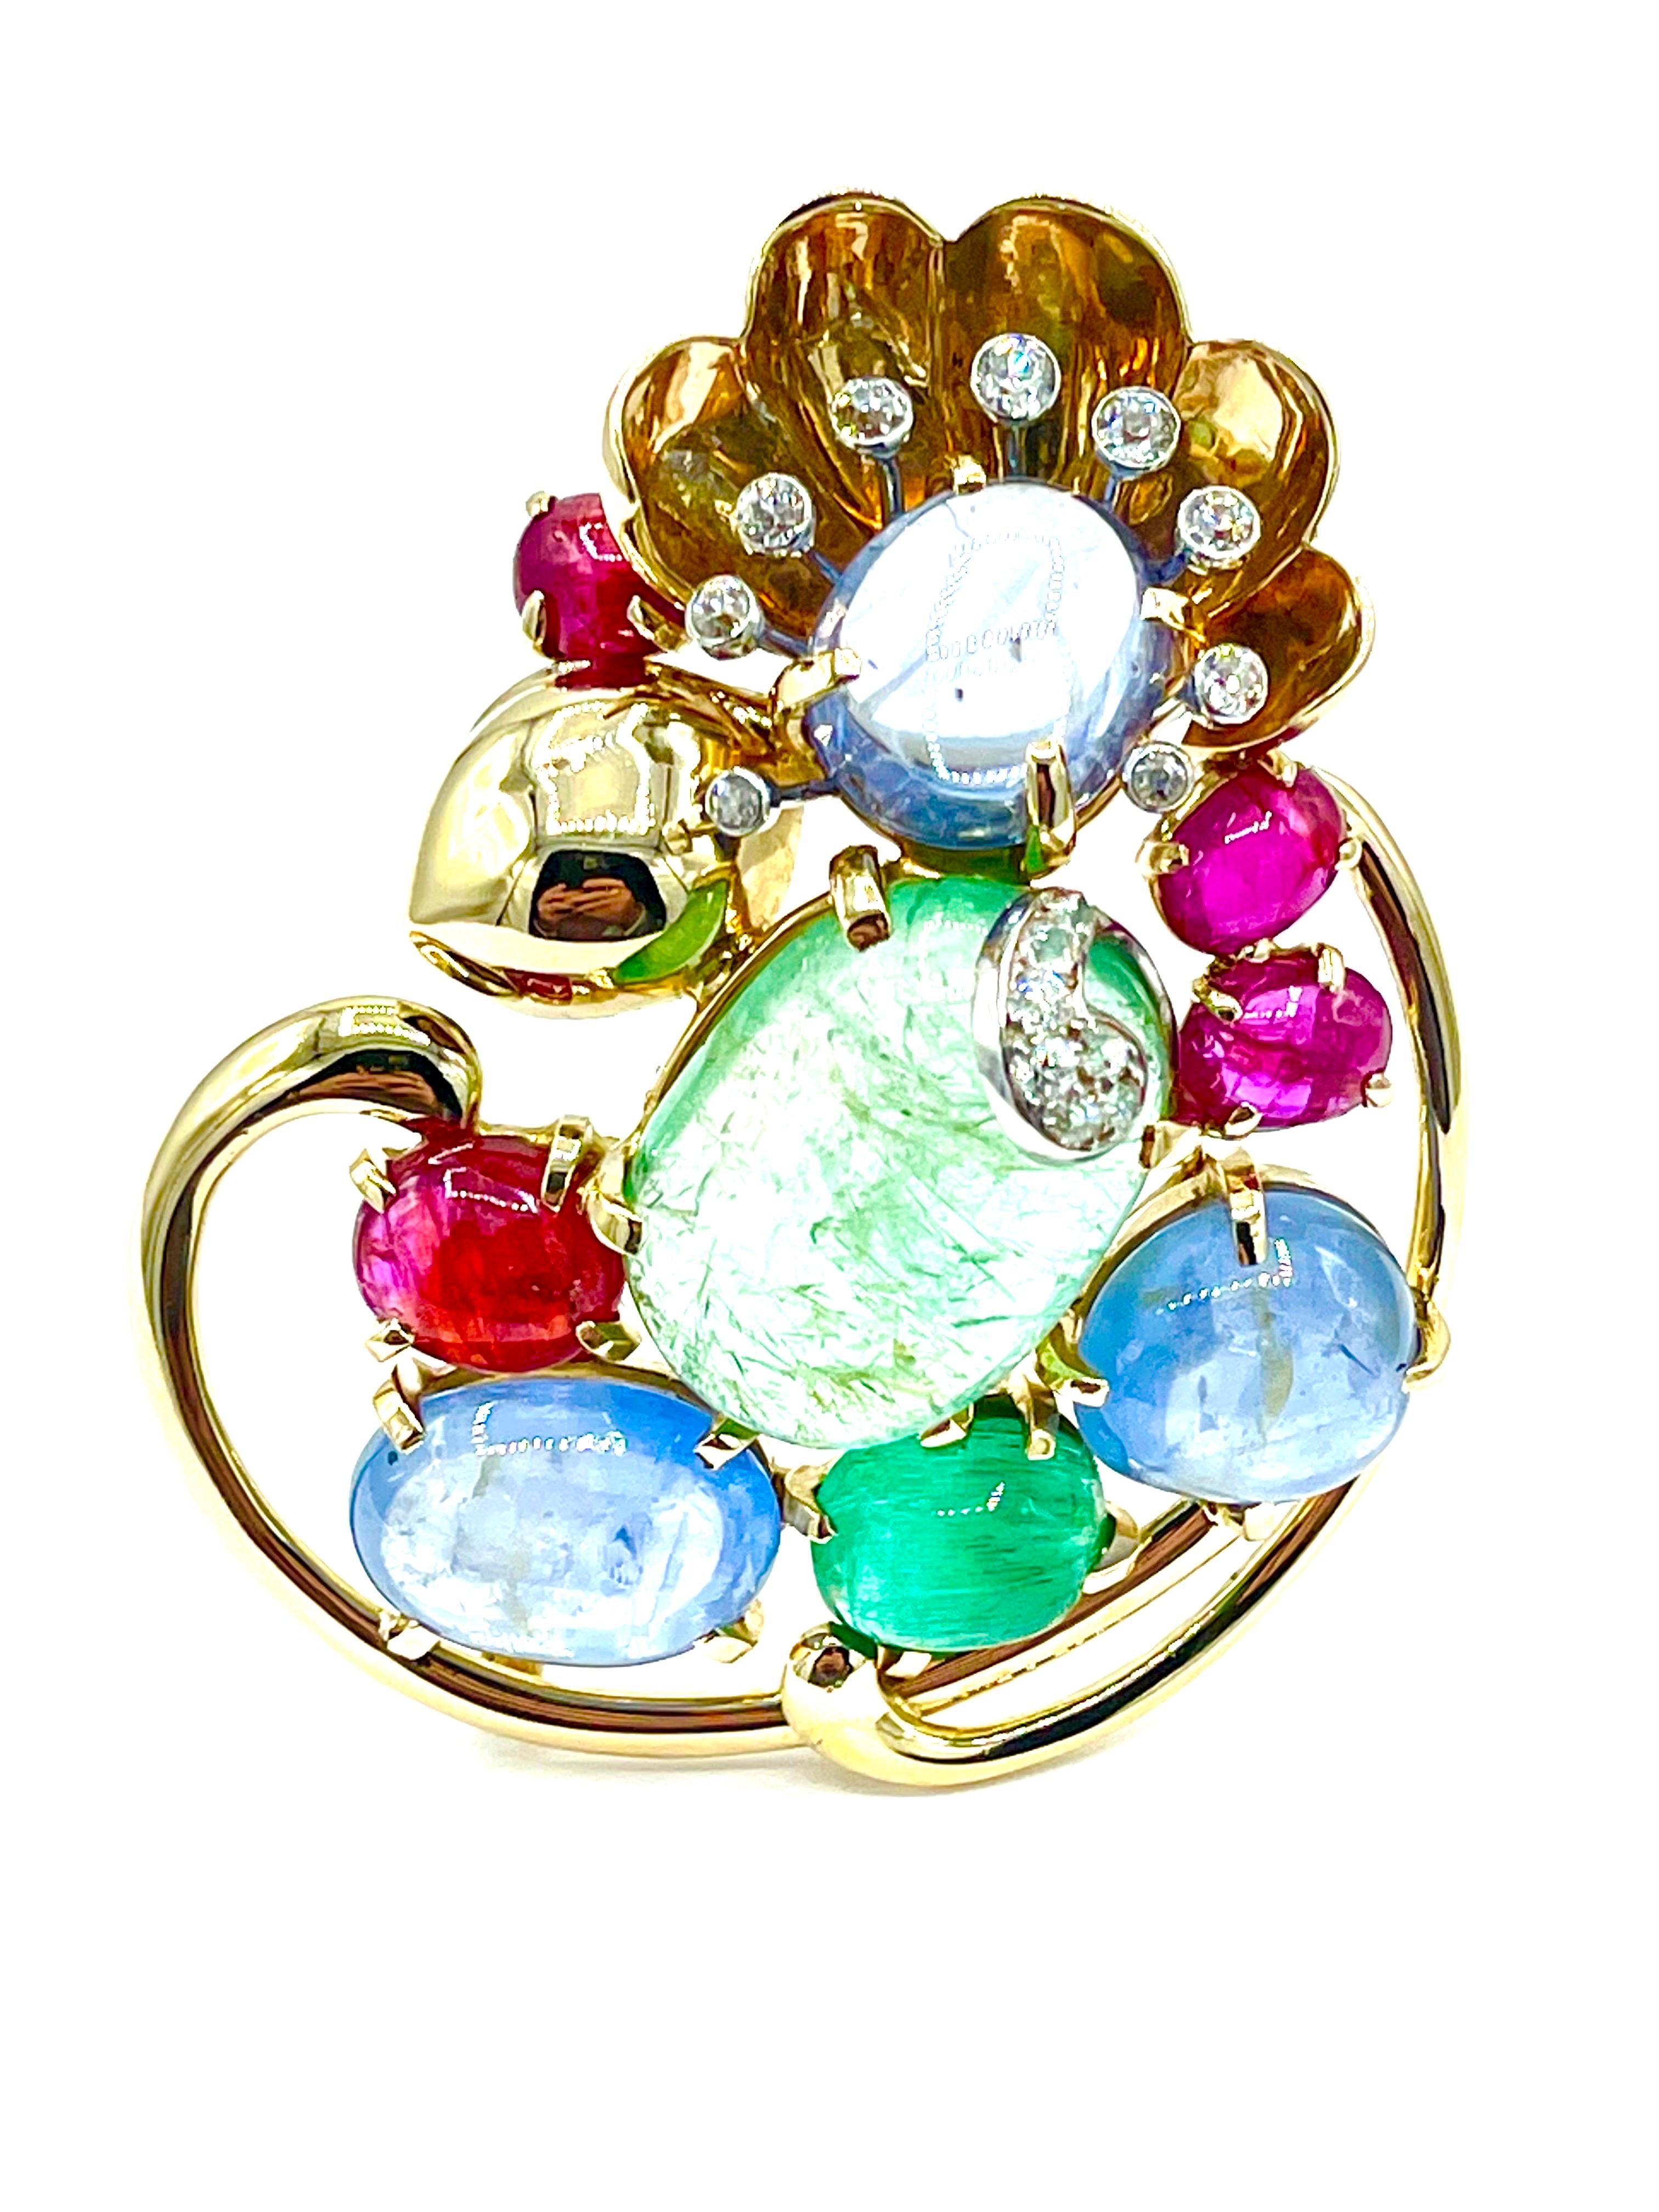 A beautifully handcrafted brooch designed by Seaman Schepps!  The brooch features 17 old European cut Diamonds, set in 14K white gold, with cabochon cut Emeralds, Sapphires, and Rubies set in 14K yellow gold.  The brooch measures 2.50 inches in